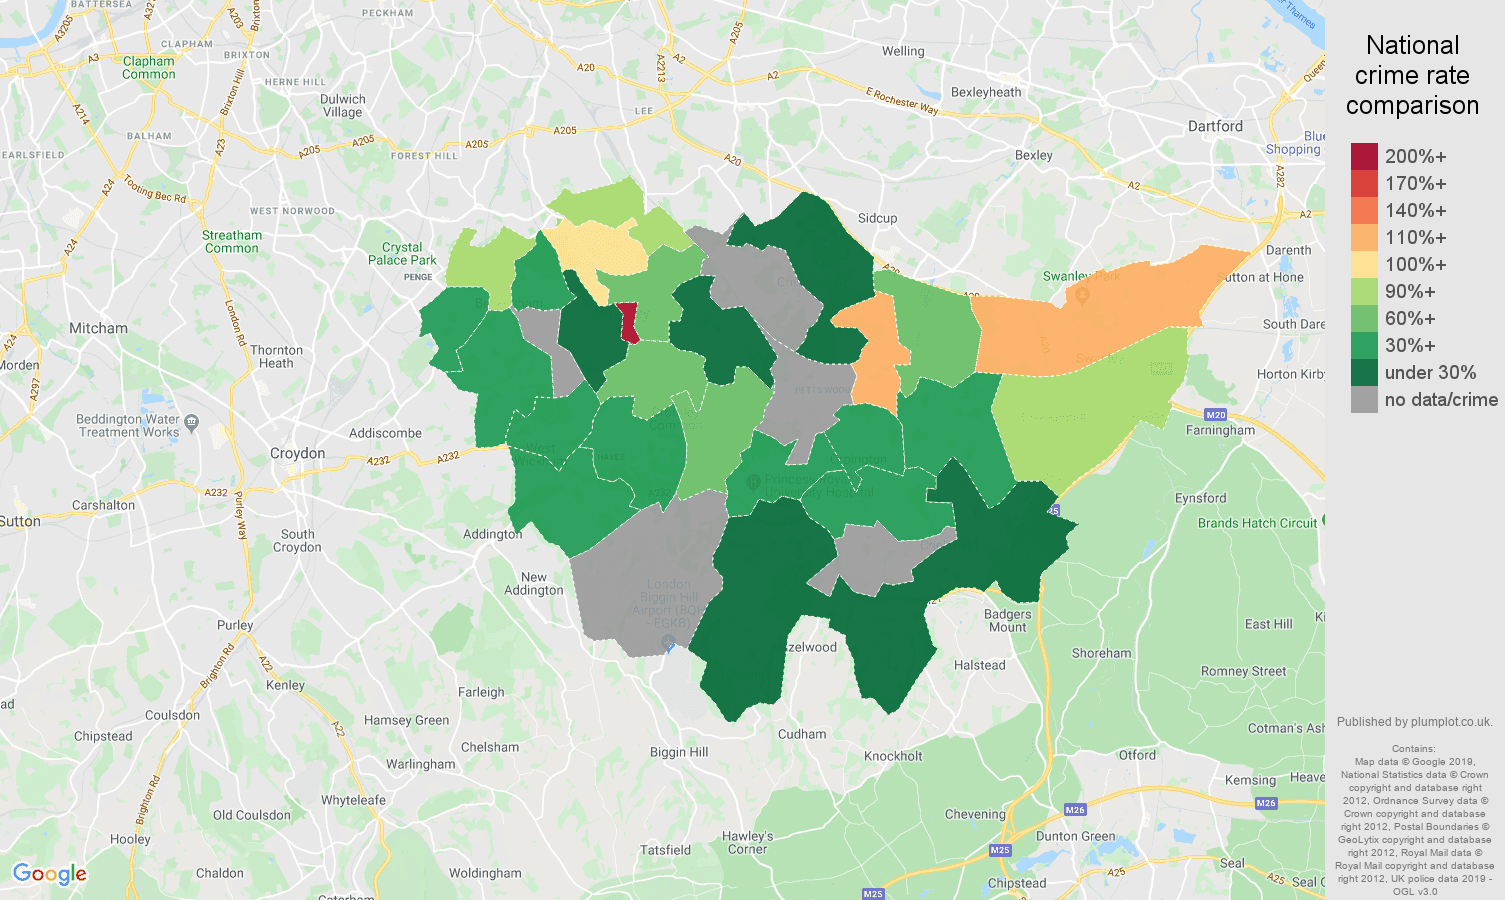 Bromley possession of weapons crime rate comparison map